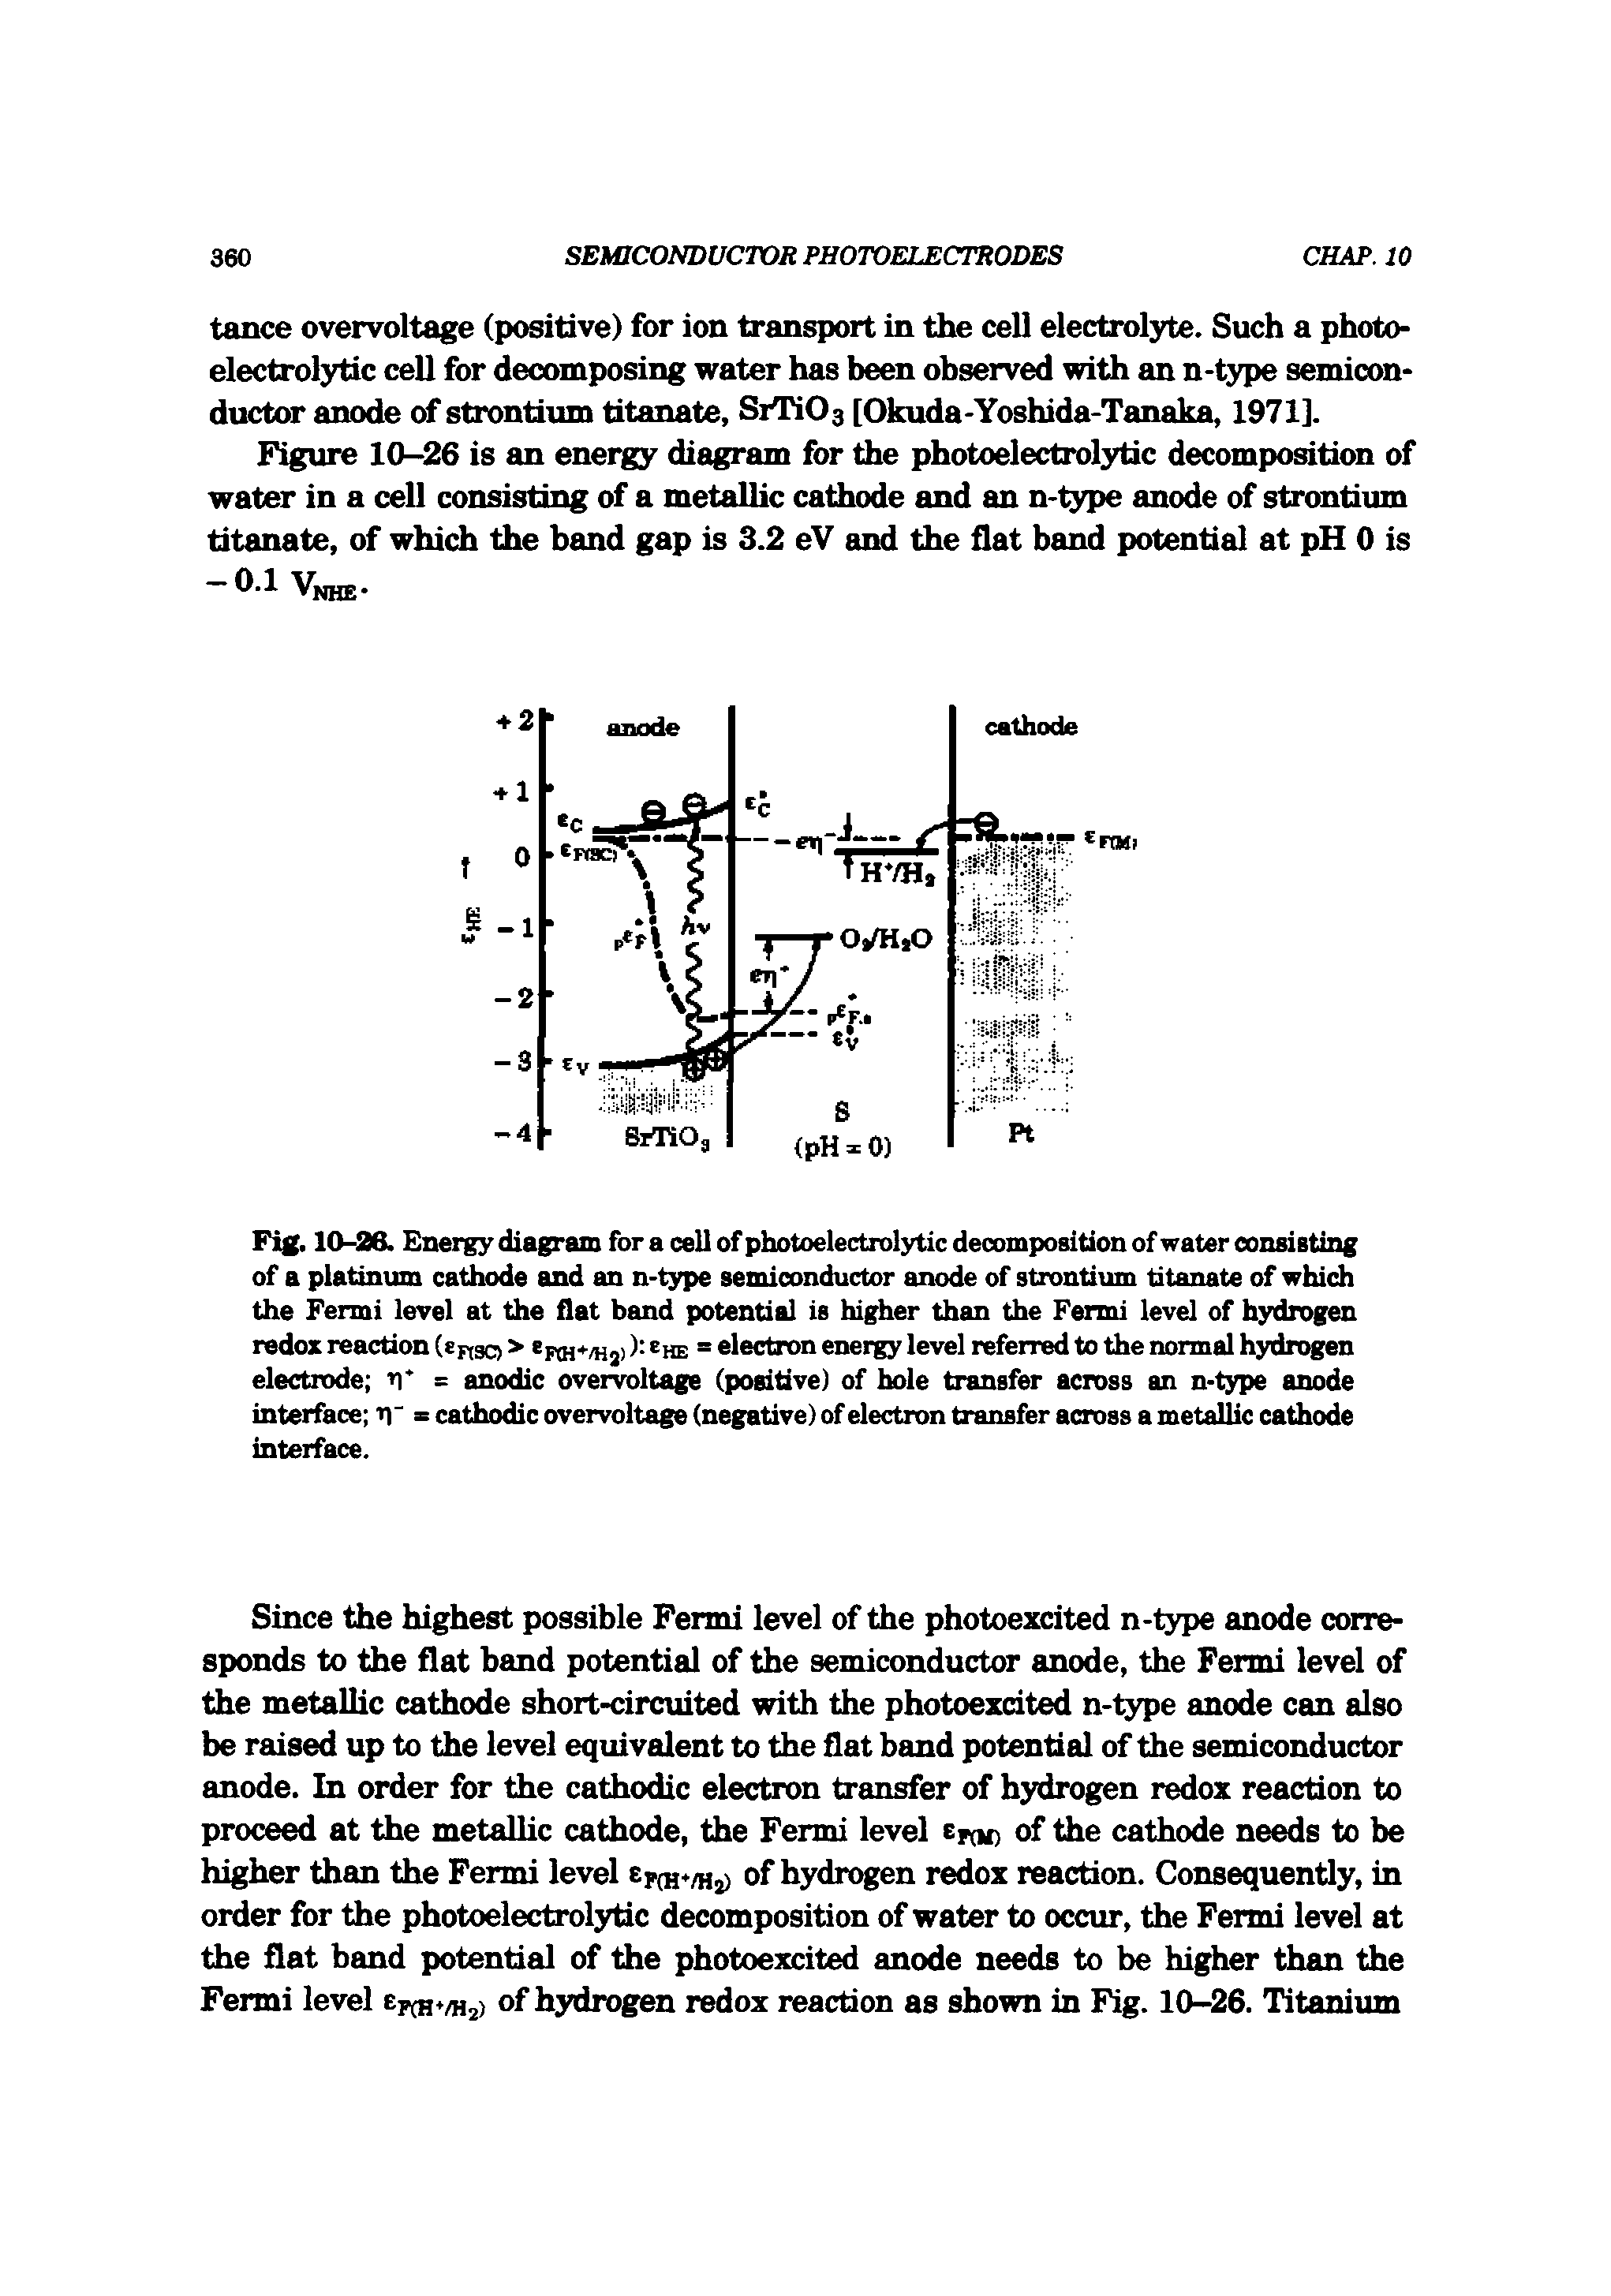 Fig. 10-26. Energy diagram for a cell of photoelectrolytic decomposition of water consisting of a platinum cathode and an n-type semiconductor anode of strontium titanate of which the Fermi level at the flat band potential is higher than the Fermi level of hydrogen redox reaction (snao > epM+zHj) ) he = electron energy level referred to the normal hydrogen electrode ri = anodic overvoltage (positive) of hole transfer across an n-type anode interface t = cathodic overvoltage (negative) of electron transfer across a metallic cathode interface.